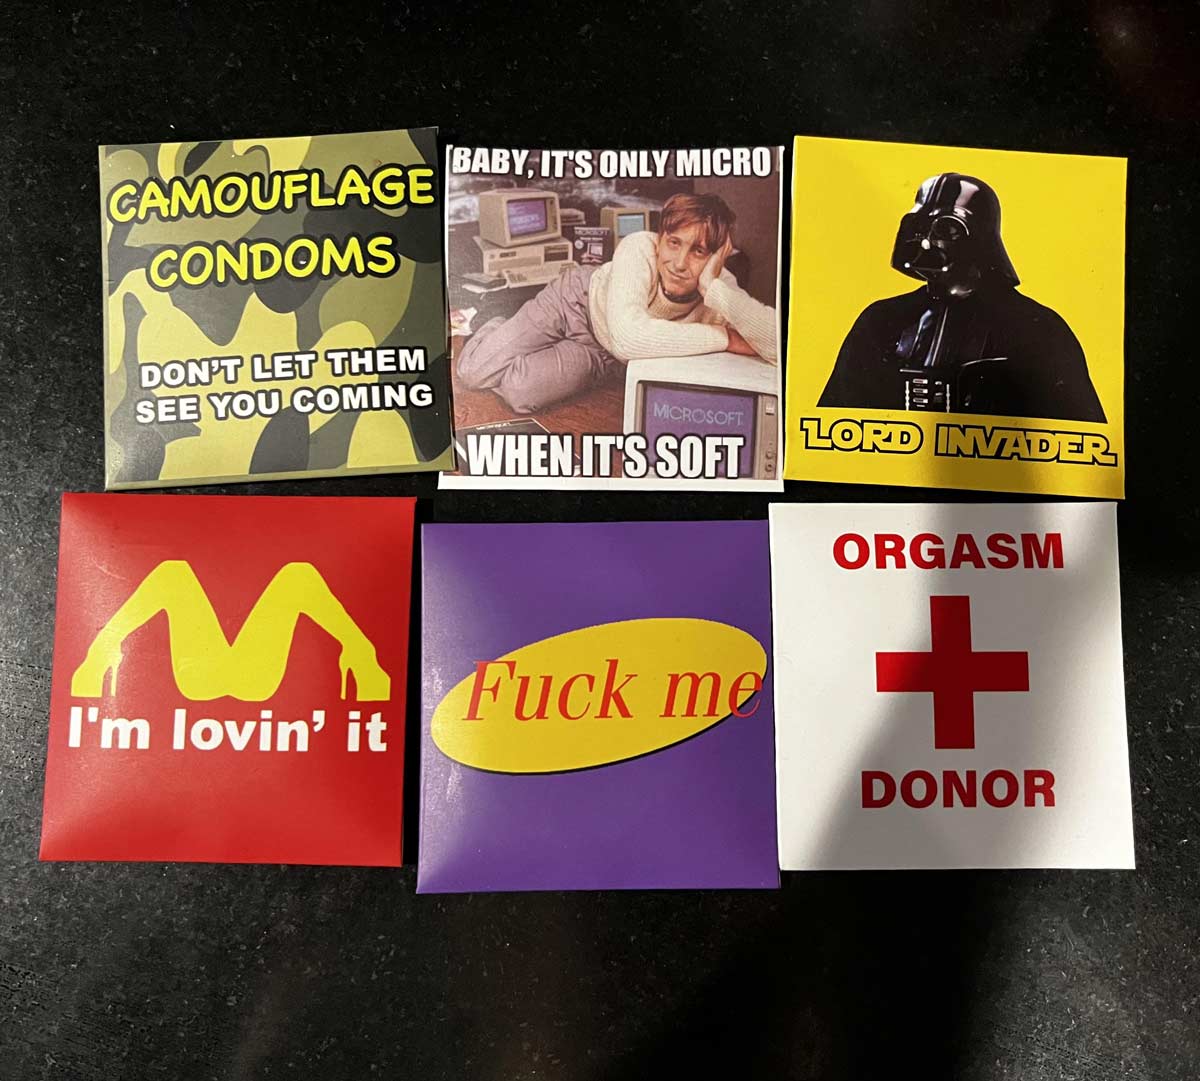 My sister bought me some condoms to add to my collection from QLD, Australia while on holidays recently